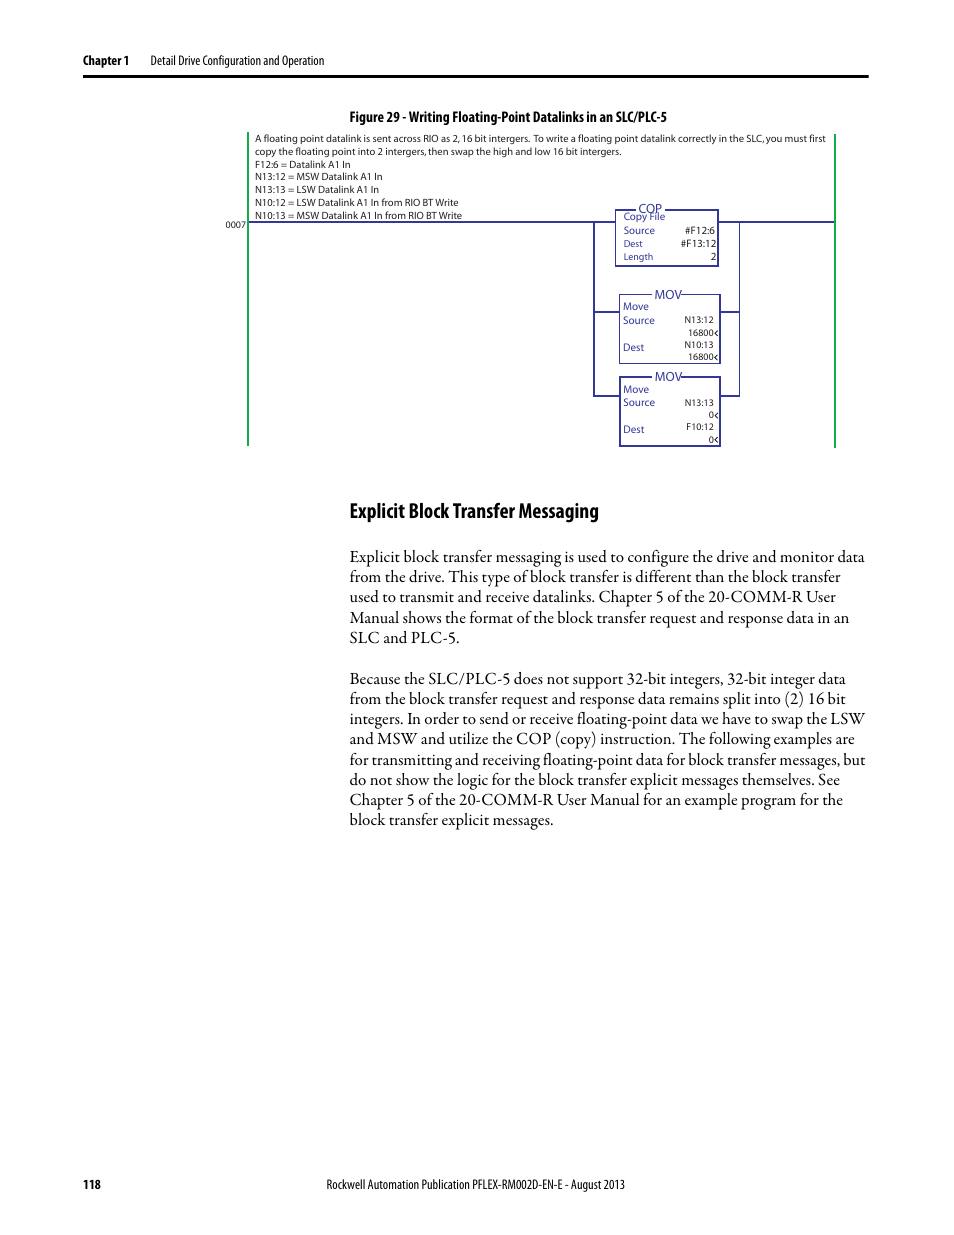 Explicit block transfer messaging | Rockwell Automation 20D PowerFlex 700S with Phase I Control Reference Manual User Manual | Page 118 / 190